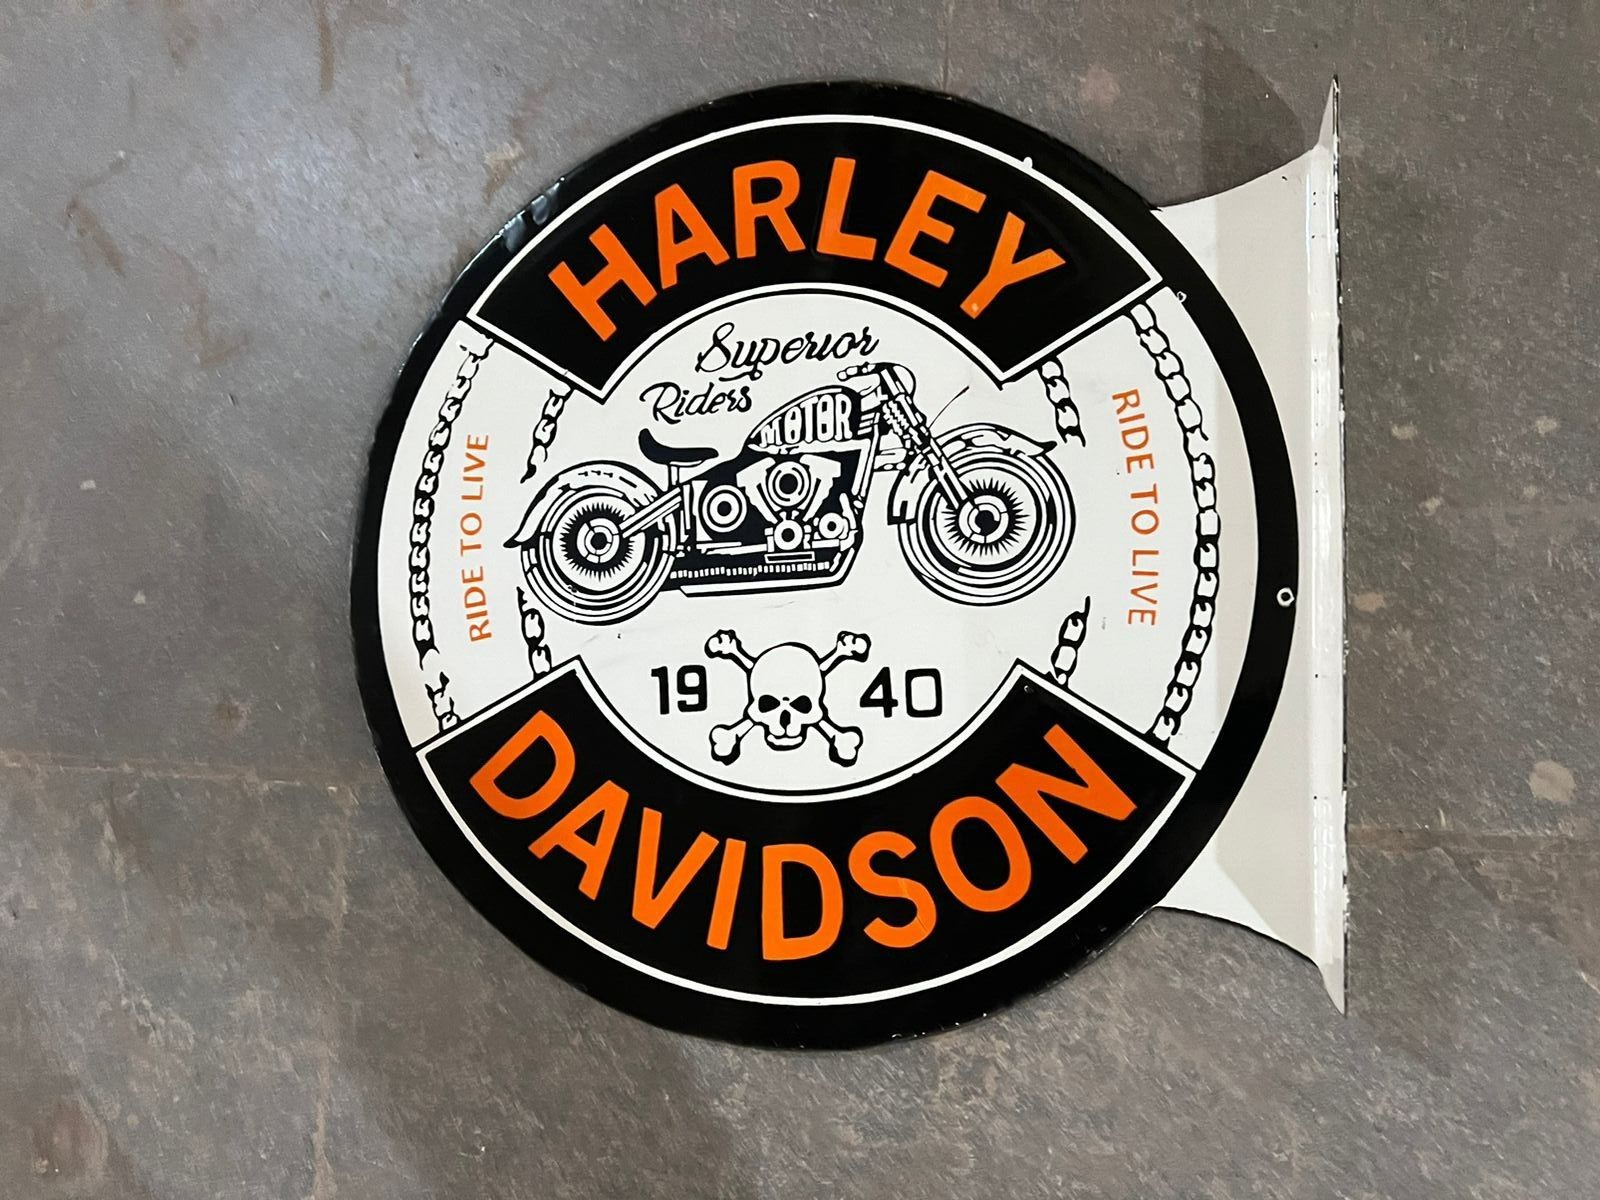 HARLEY DAVIDSON PORCELAIN ENAMEL SIGN 18X20.5 INCHES DOUBLE SIDED WITH FLANGE